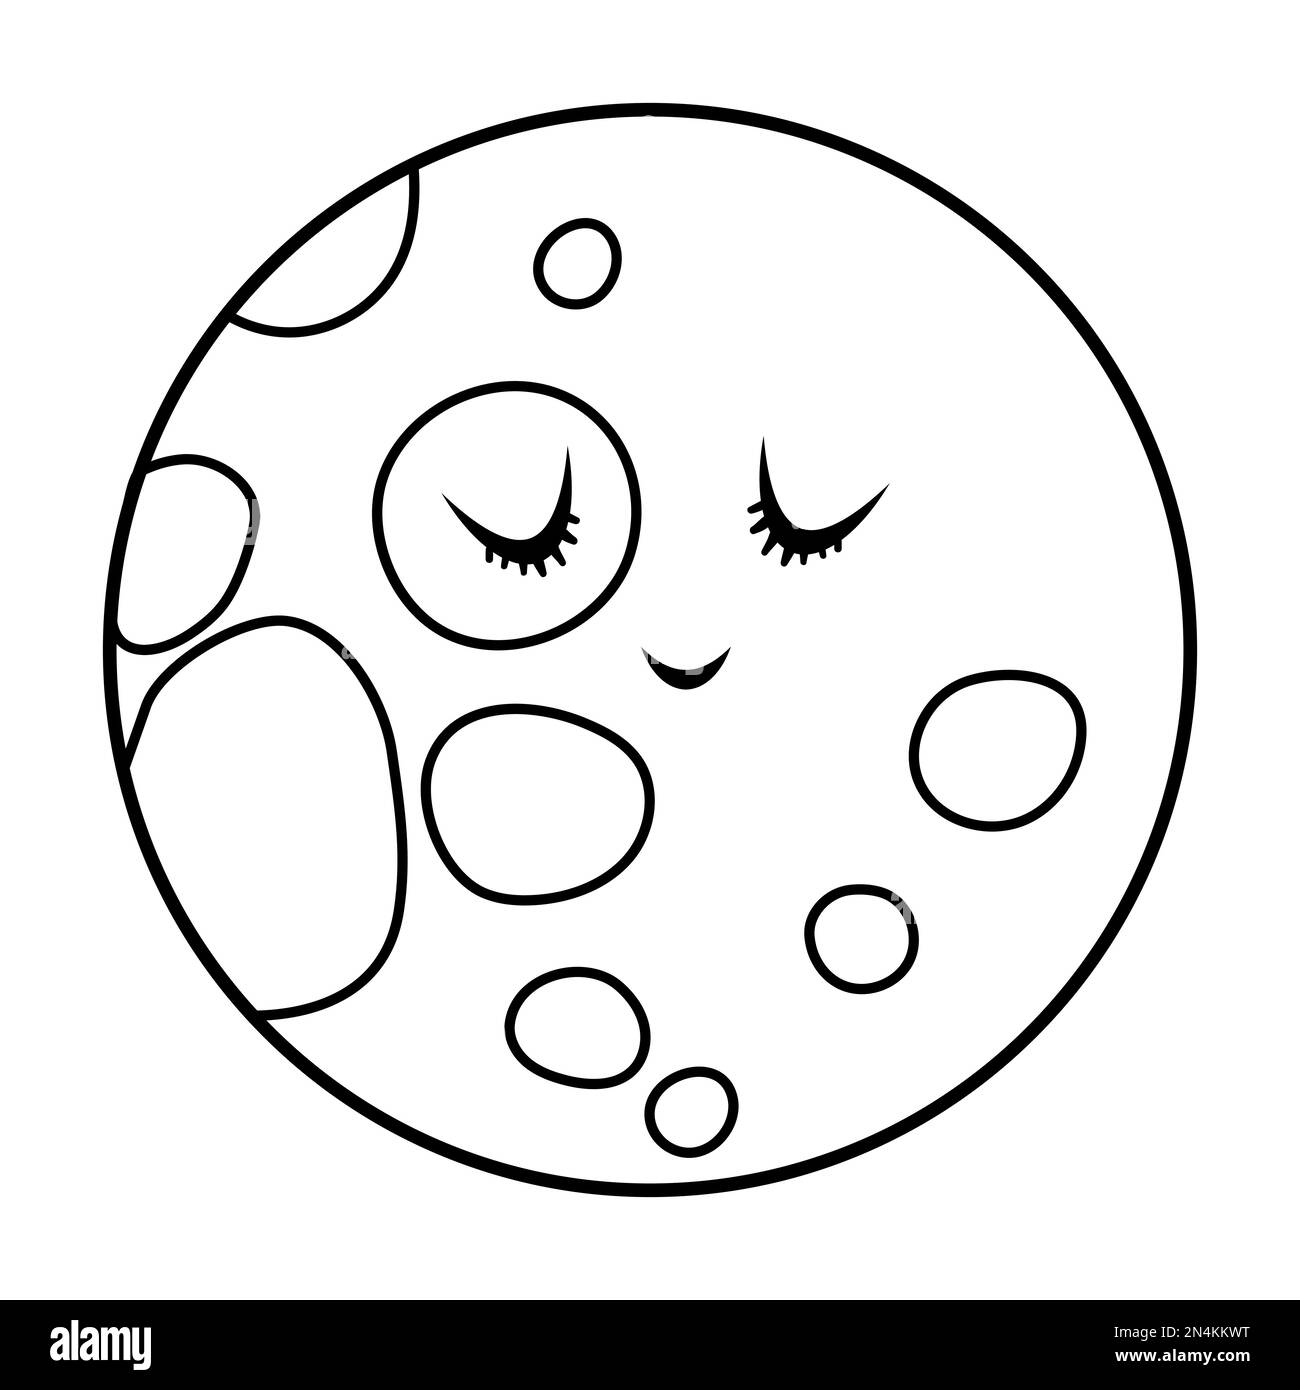 Vector black and white moon illustration for children. Outline smiling planet icon isolated on white background. Space coloring page for kids Stock Vector